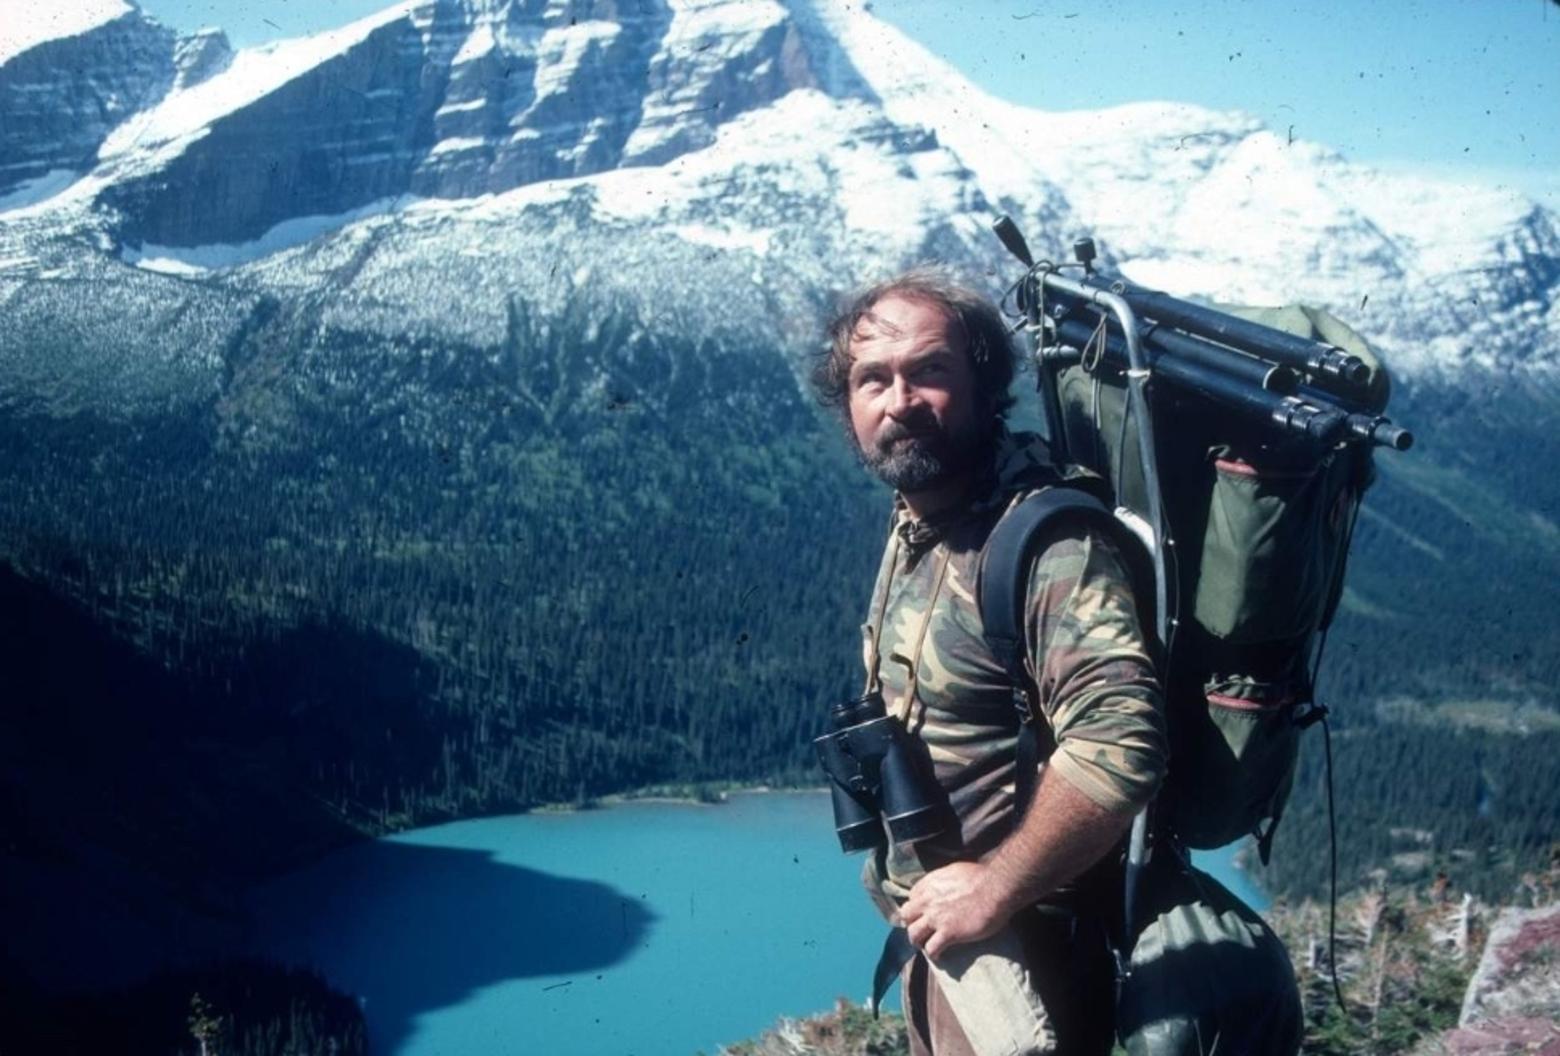 Doug Peacock, the Green Beret medic who served in Vietnam, has become a leading voice in grizzly bear conservation and recently co-founded Save the Yellowstone Grizzly (https://savetheyellowstonegrizzly.org). In his earlier years, Peacock took part in the Greater Grizzly Search trying to determine if bears are inhabiting both the Selway-Bitterroot Ecosystem and the southern Rockies in Colorado. Photo courtesy Doug Peacock